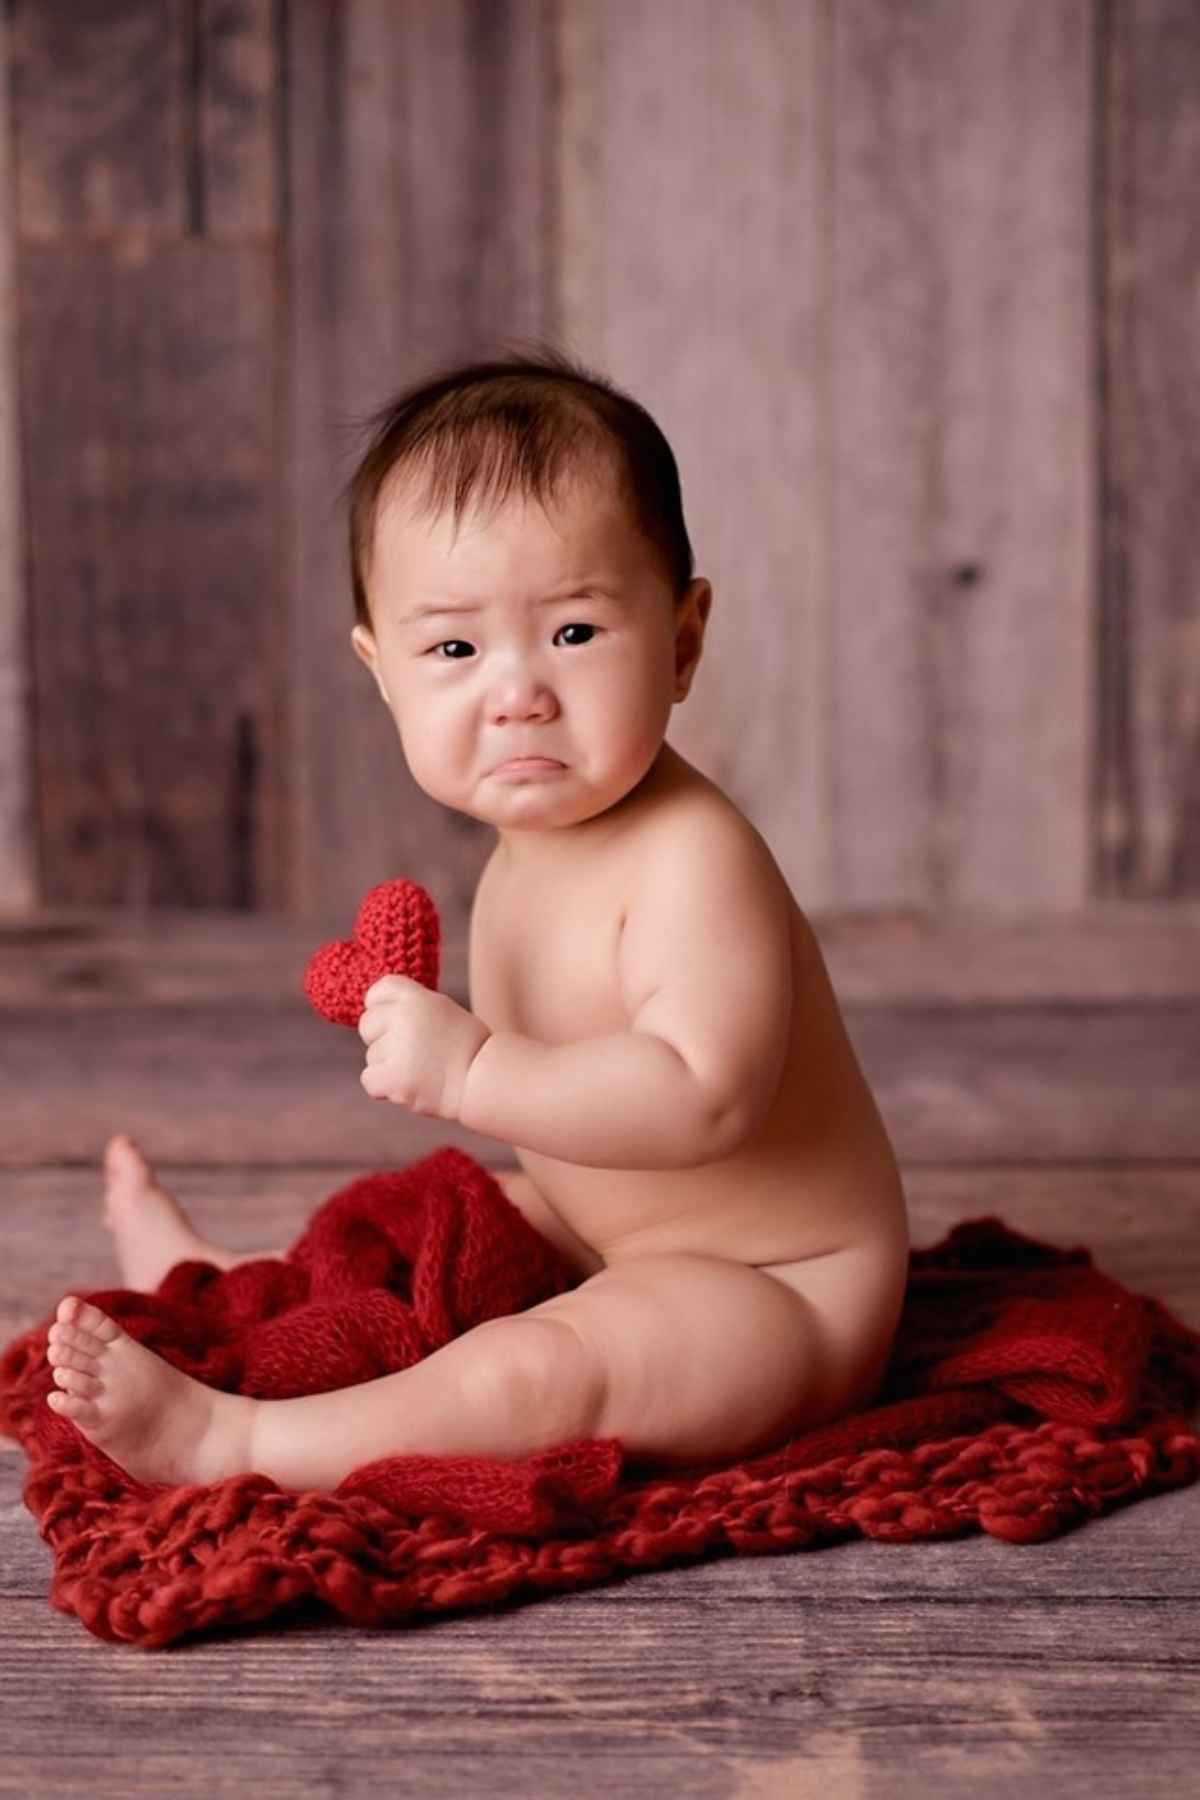 A baby sitting on a red blanket holding a heart.